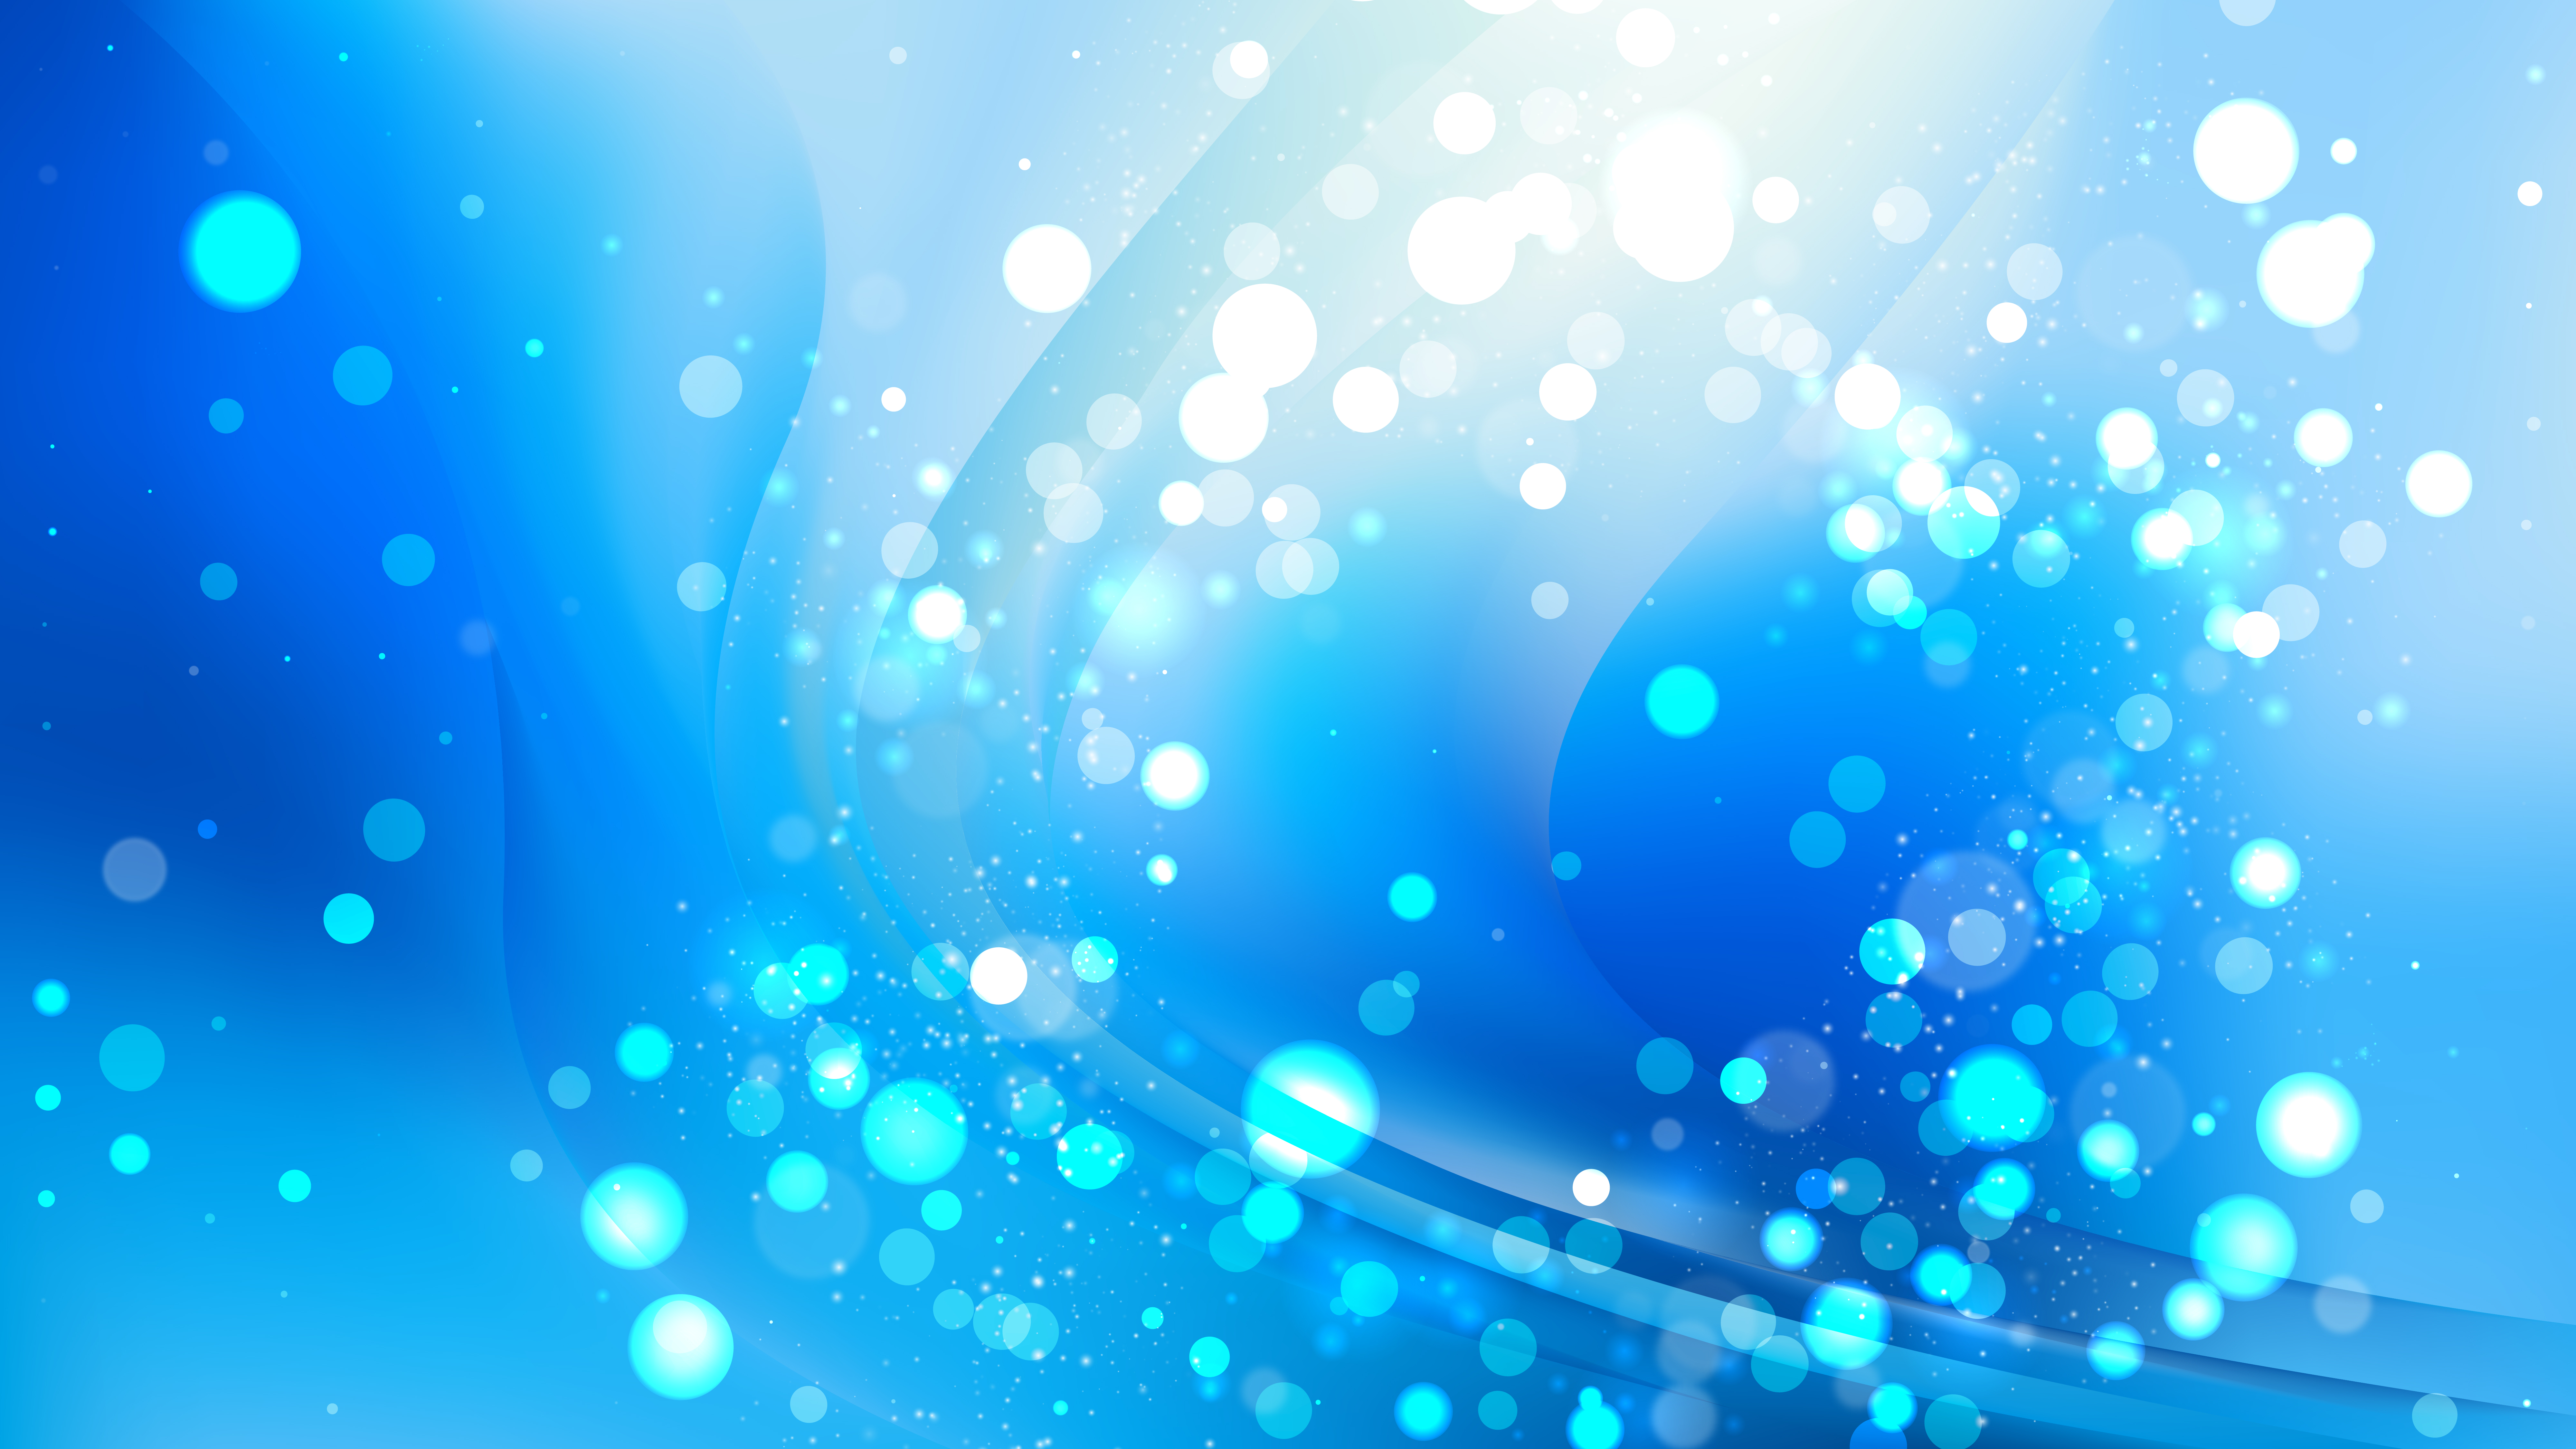 Abstract Blue And White Defocused Background Vector